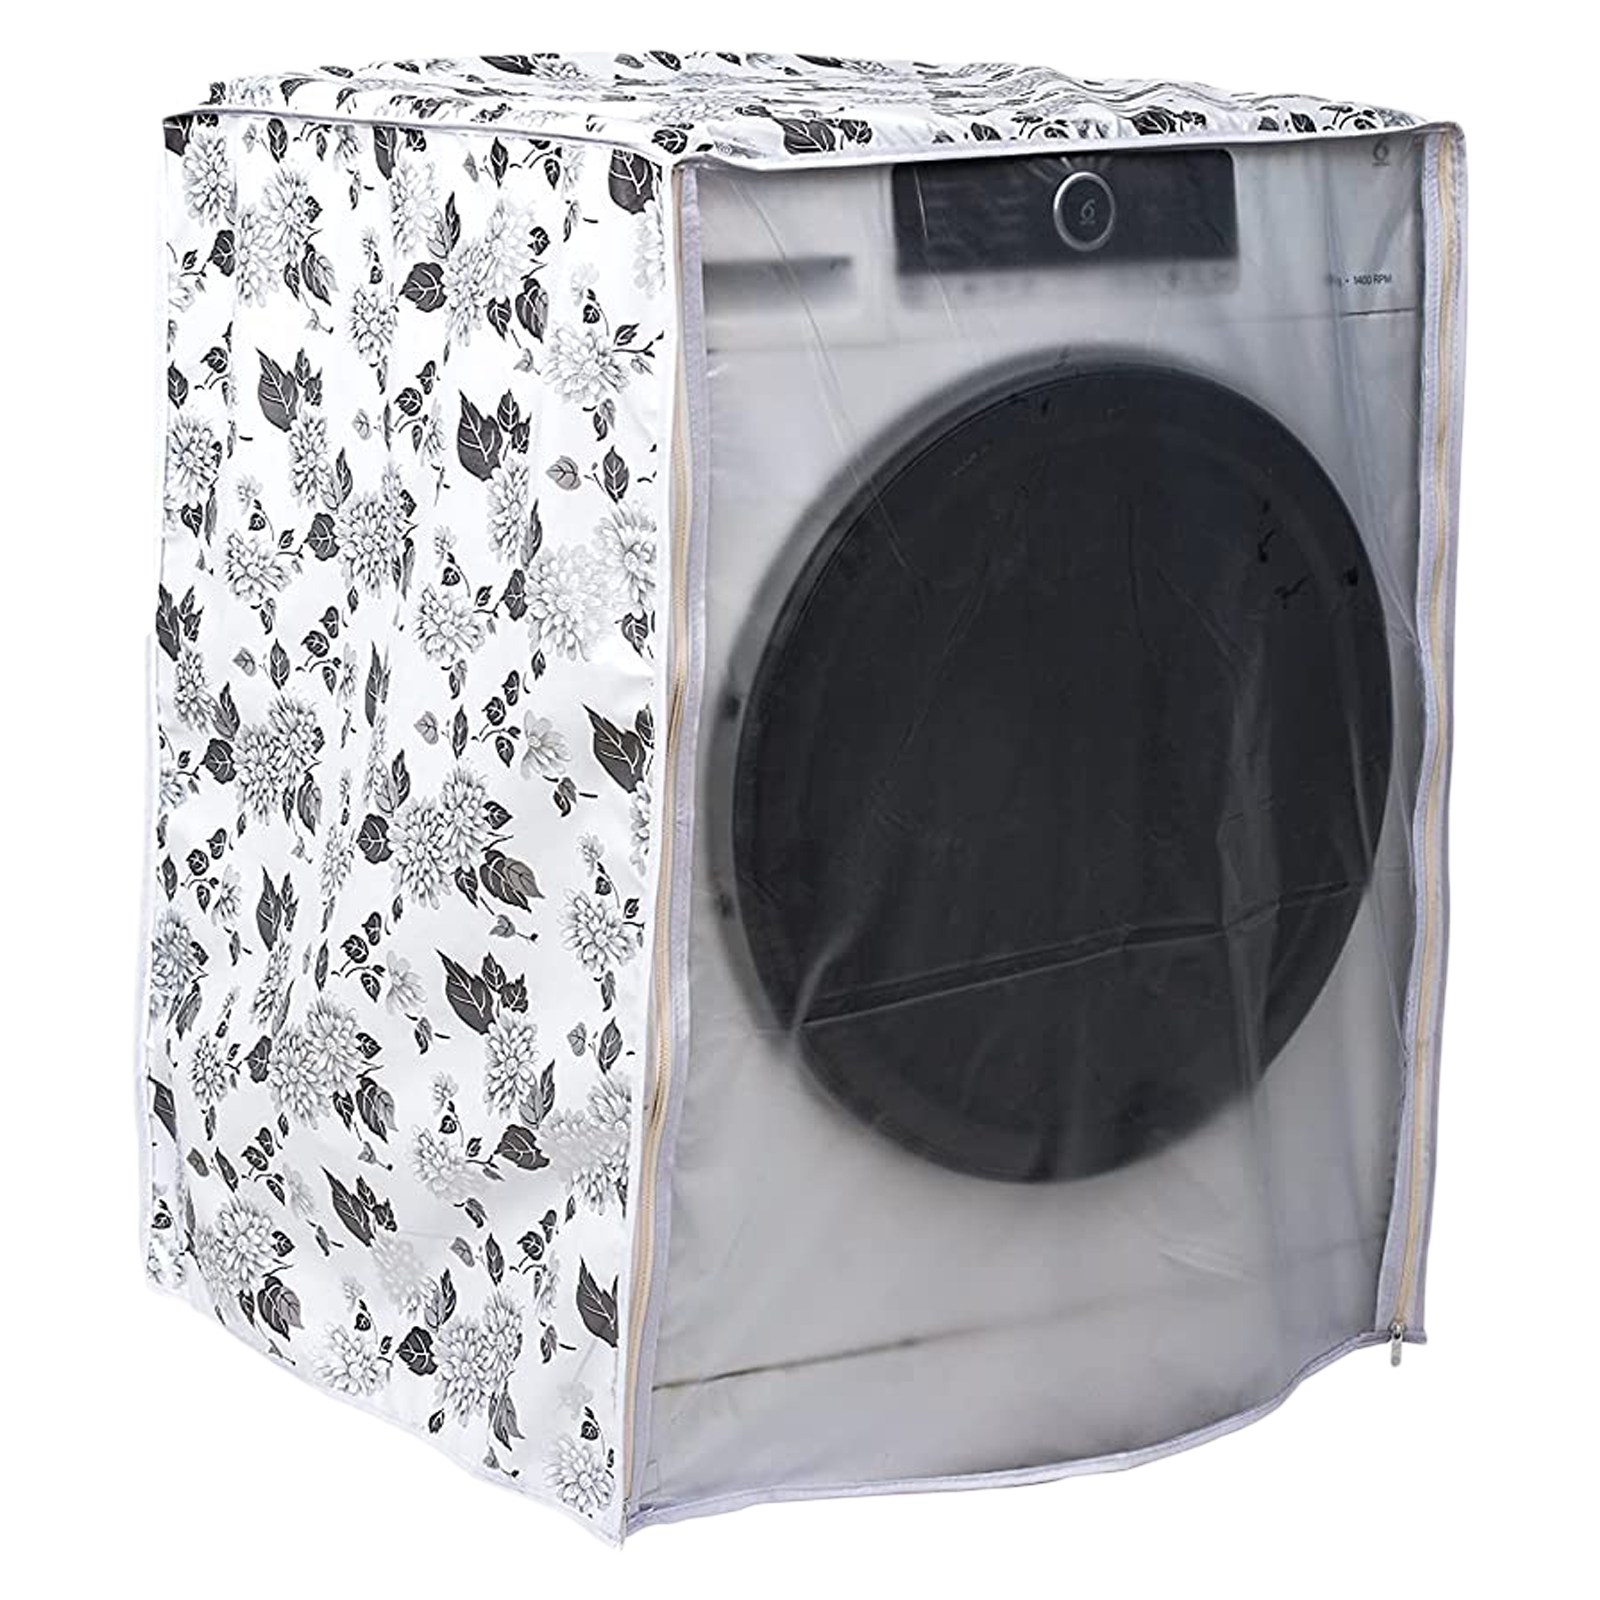 Buy Croma Cover For Top Load 8 to 10 Kg Washing Machines (Water